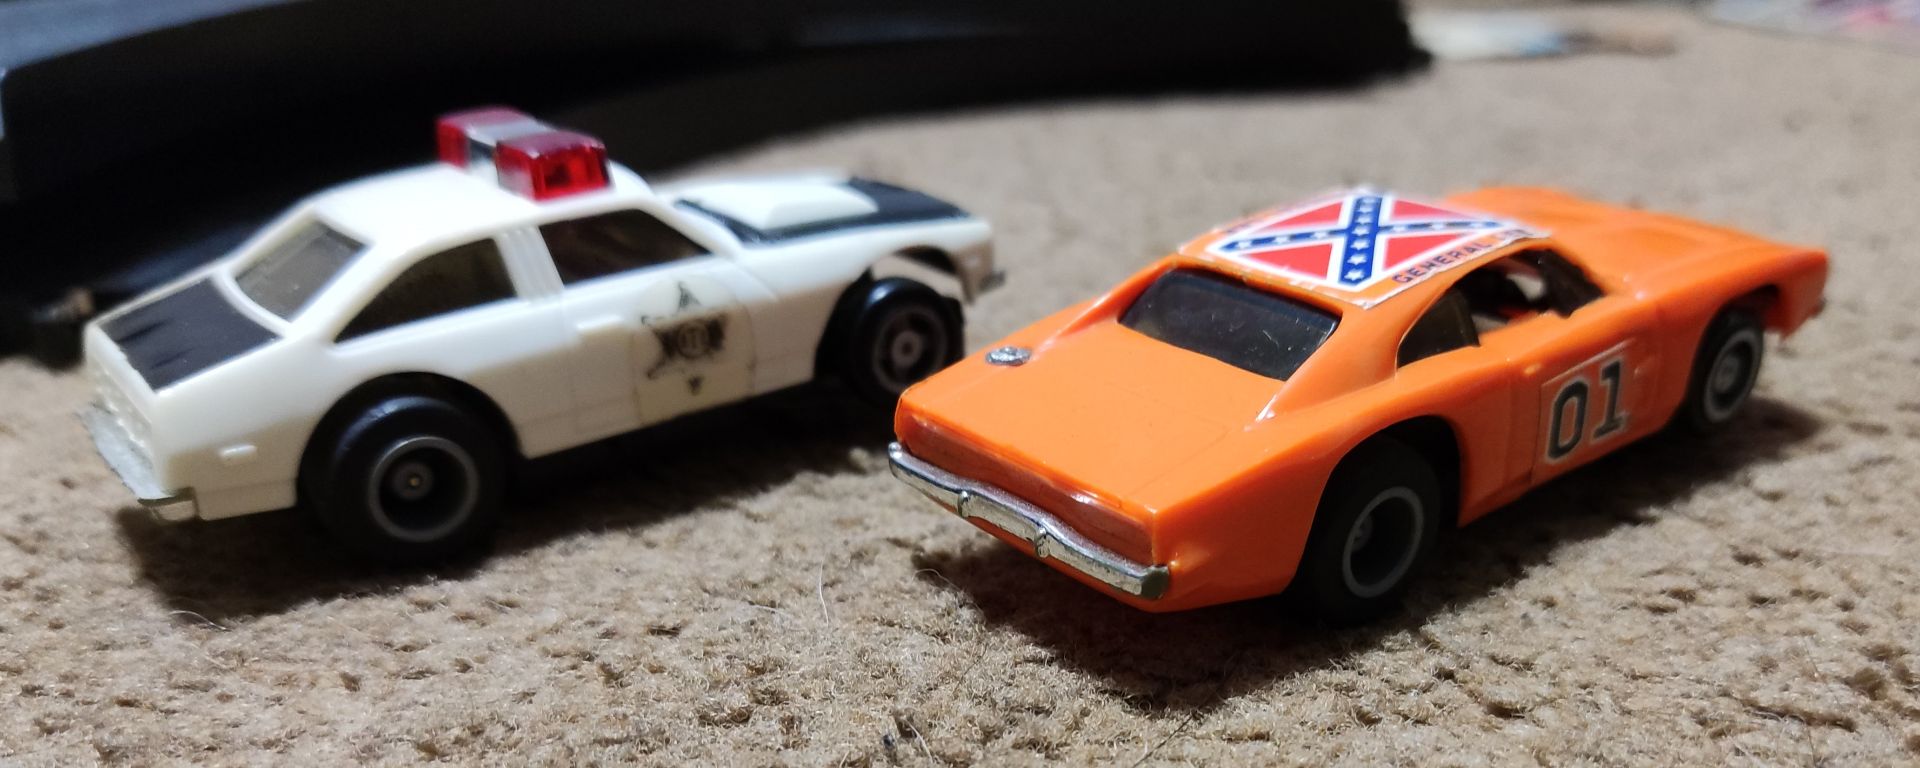 1 x Vintage Dukes of Hazzard Electric Slot Racing Set - Used - CL444 - NO VAT ON THE HAMMER - - Image 12 of 26